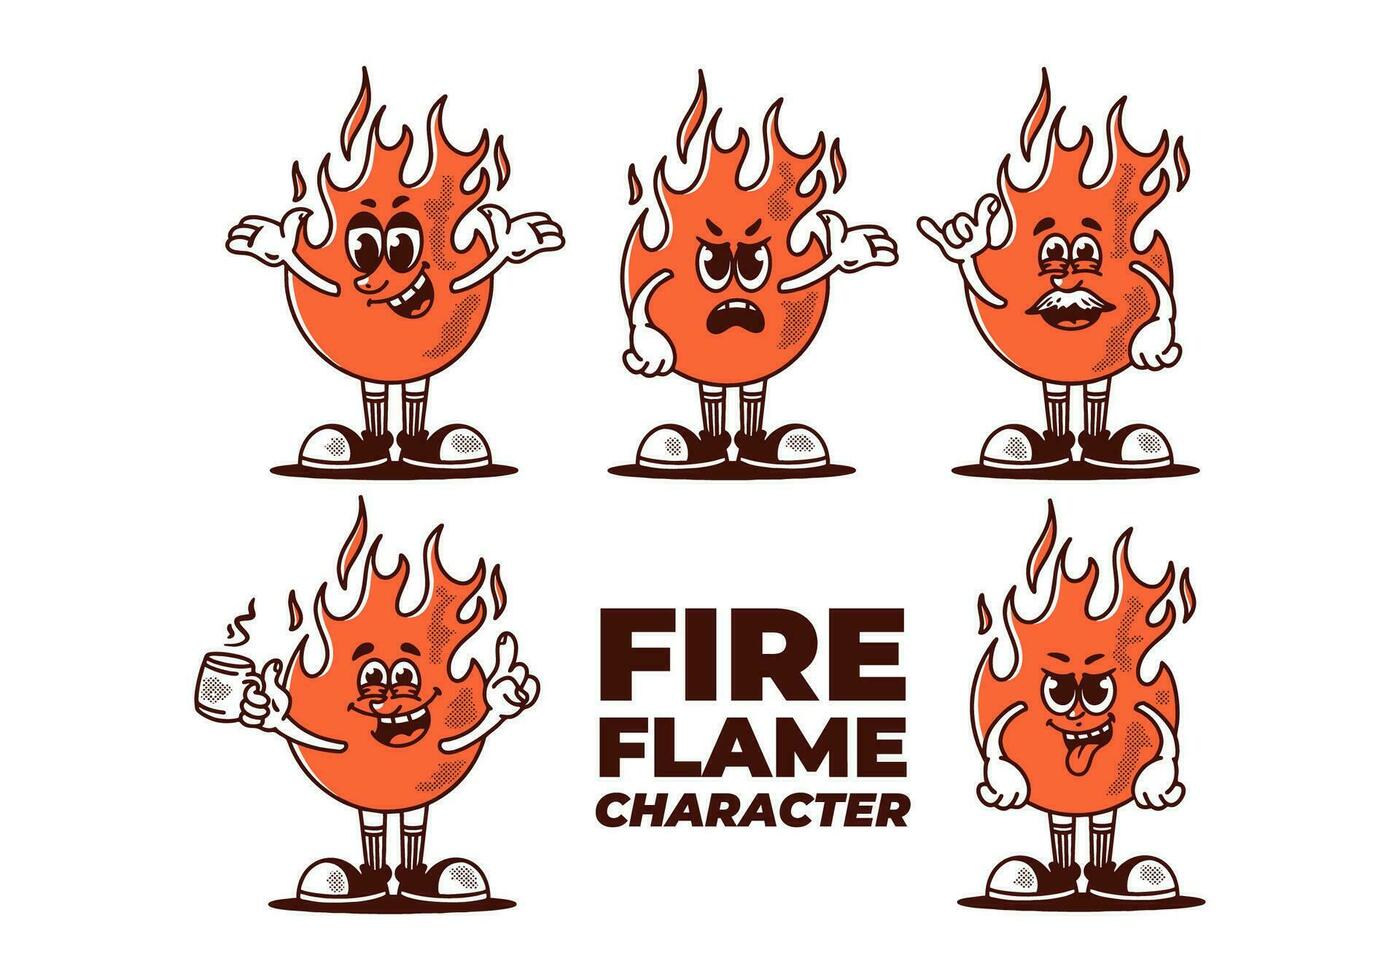 Vintage style illustration of a fire flame set character in five different pose vector